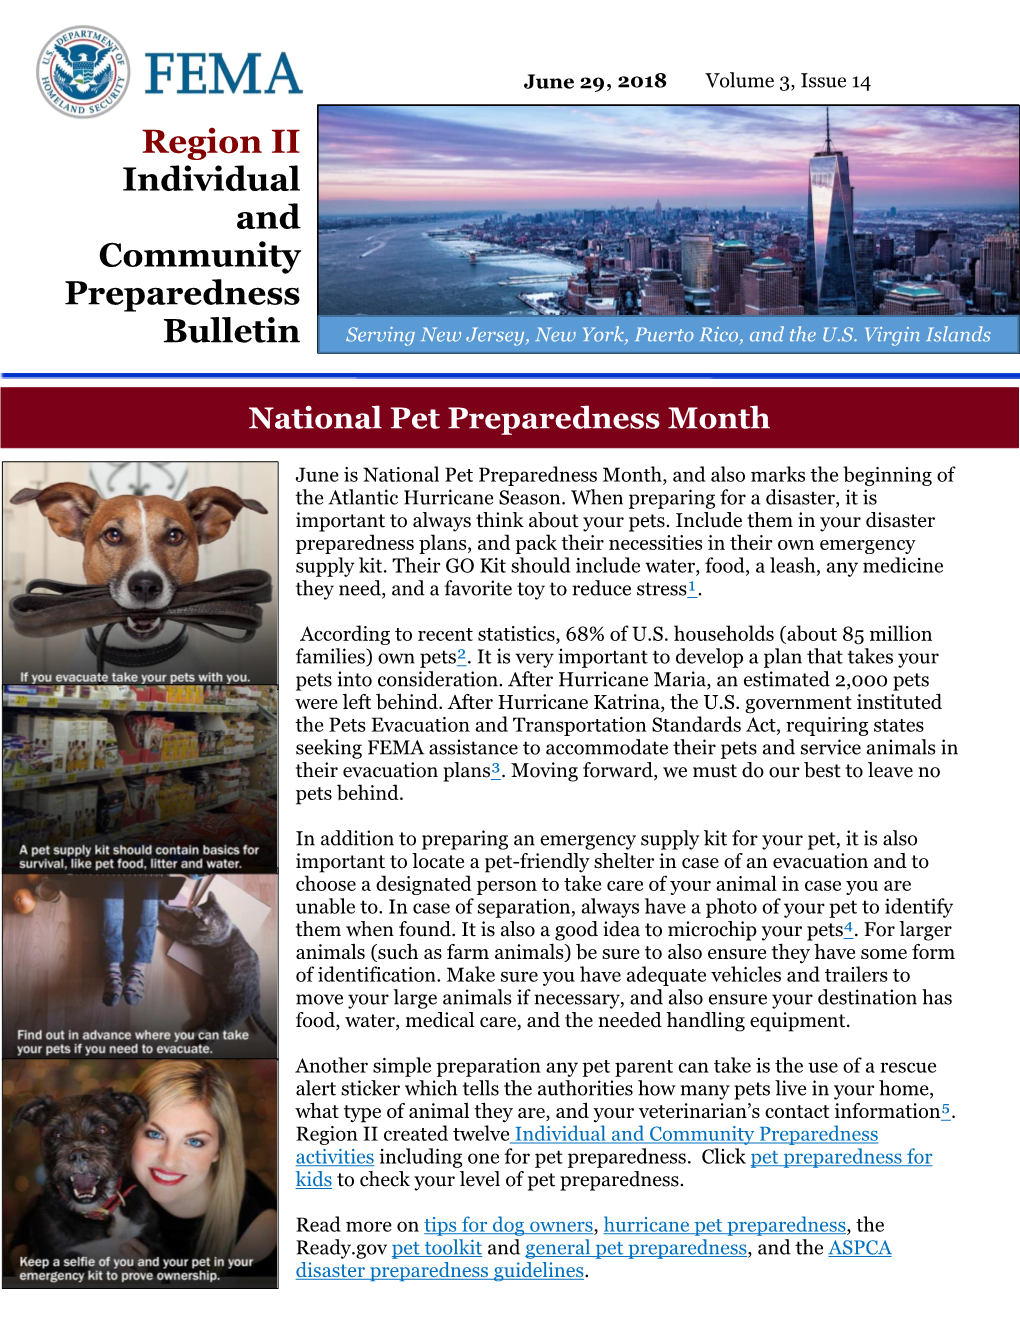 Region II Individual and Community Preparedness Bulletin Serving New Jersey, New York, Puerto Rico, and the U.S